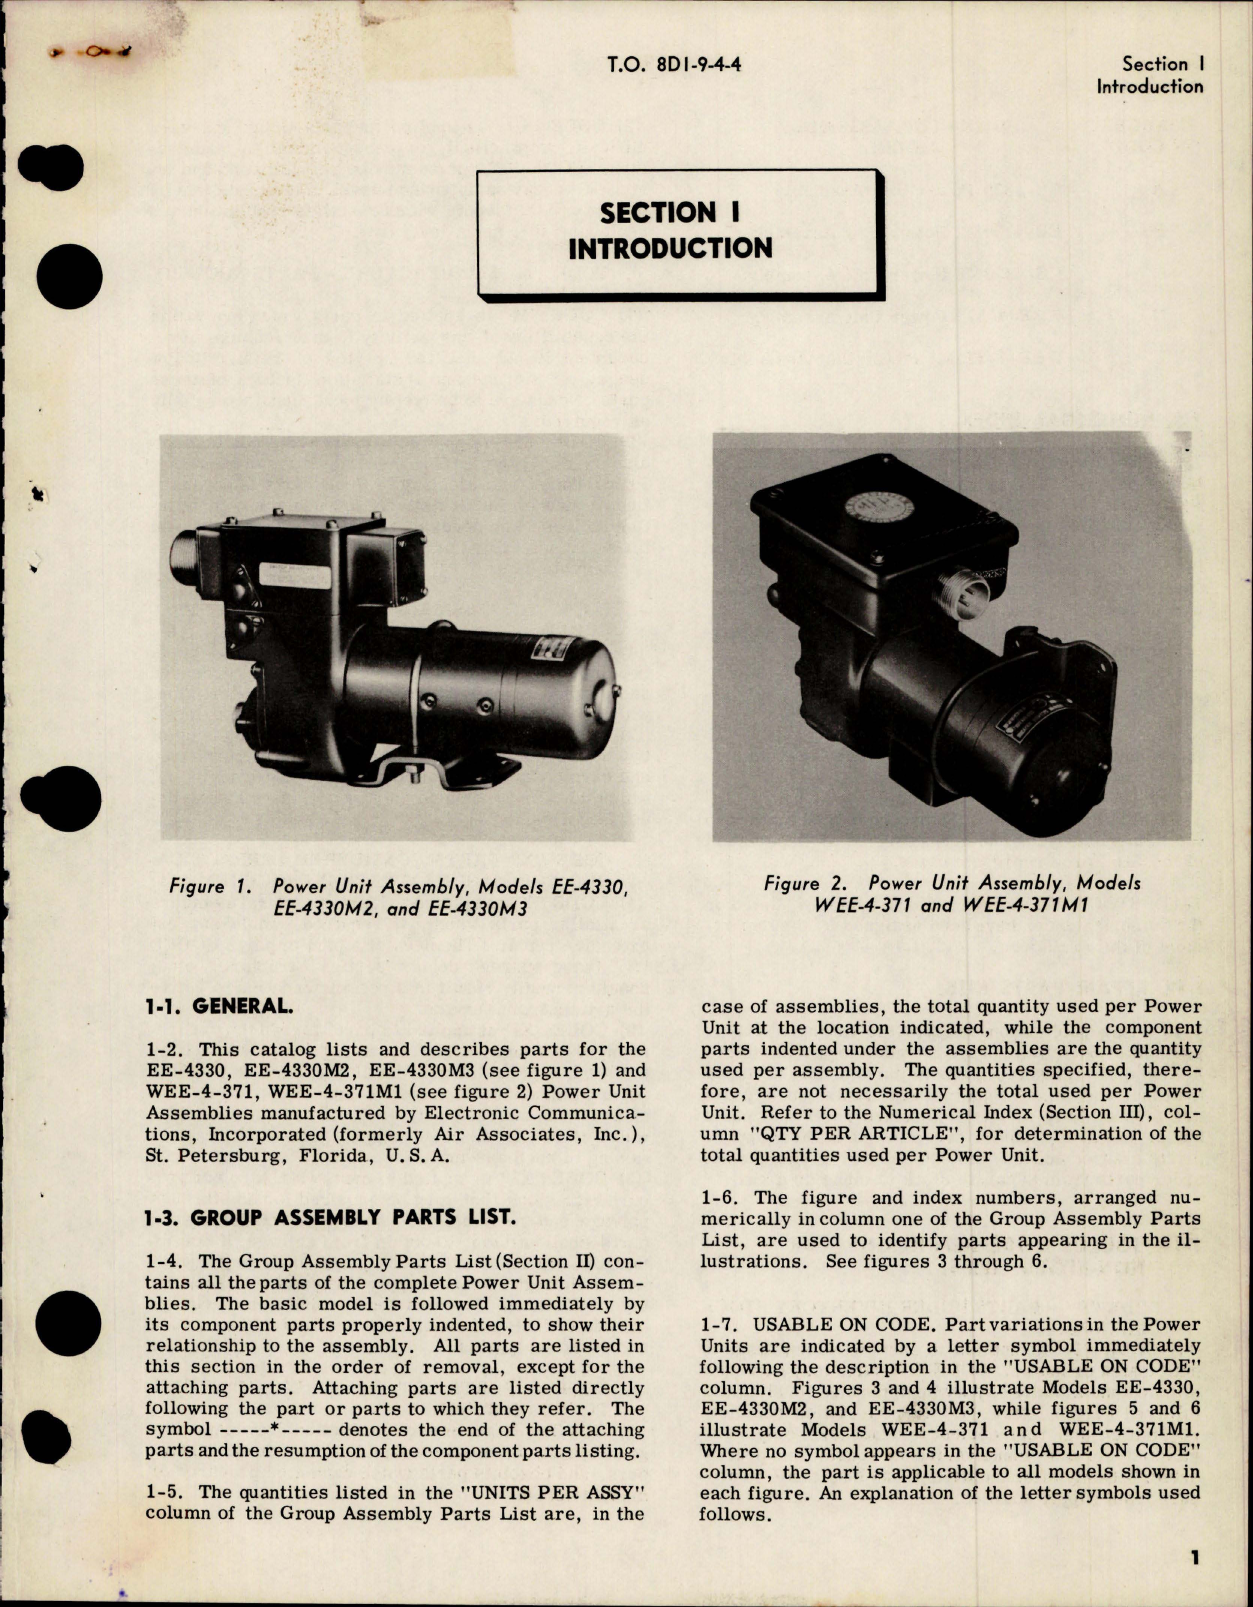 Sample page 5 from AirCorps Library document: Illustrated Parts Breakdown for Power Unit Assembly 